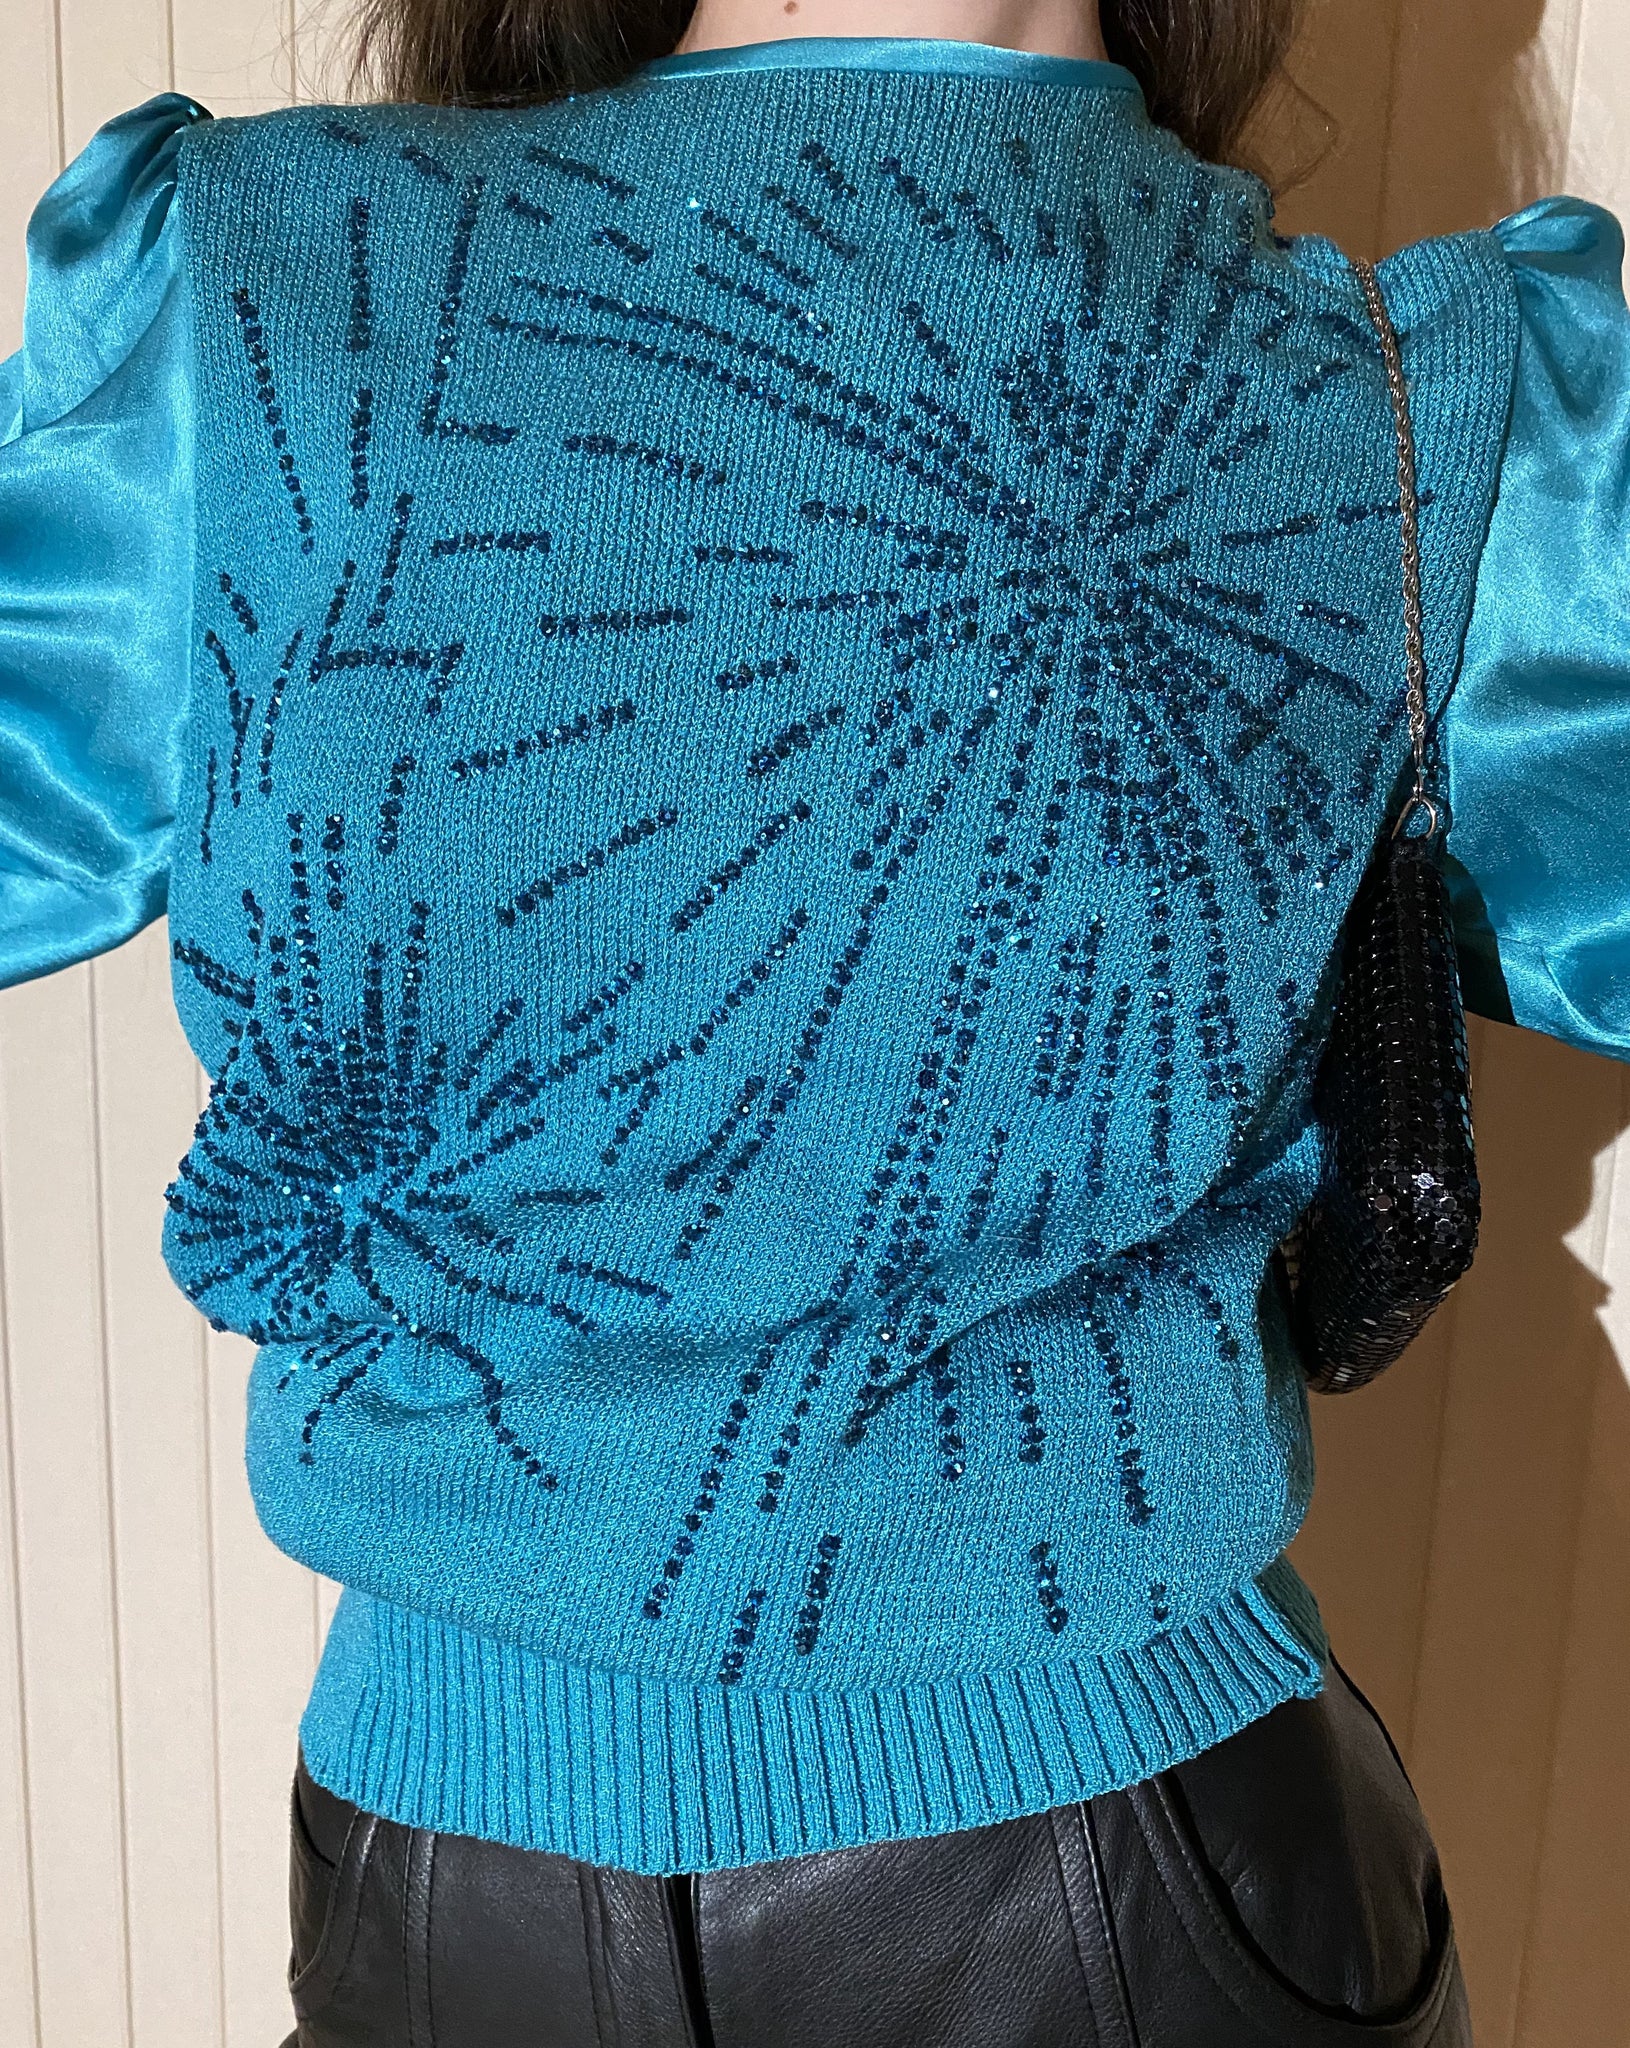 80s Embellished Sweater Blouse (fits S/M)